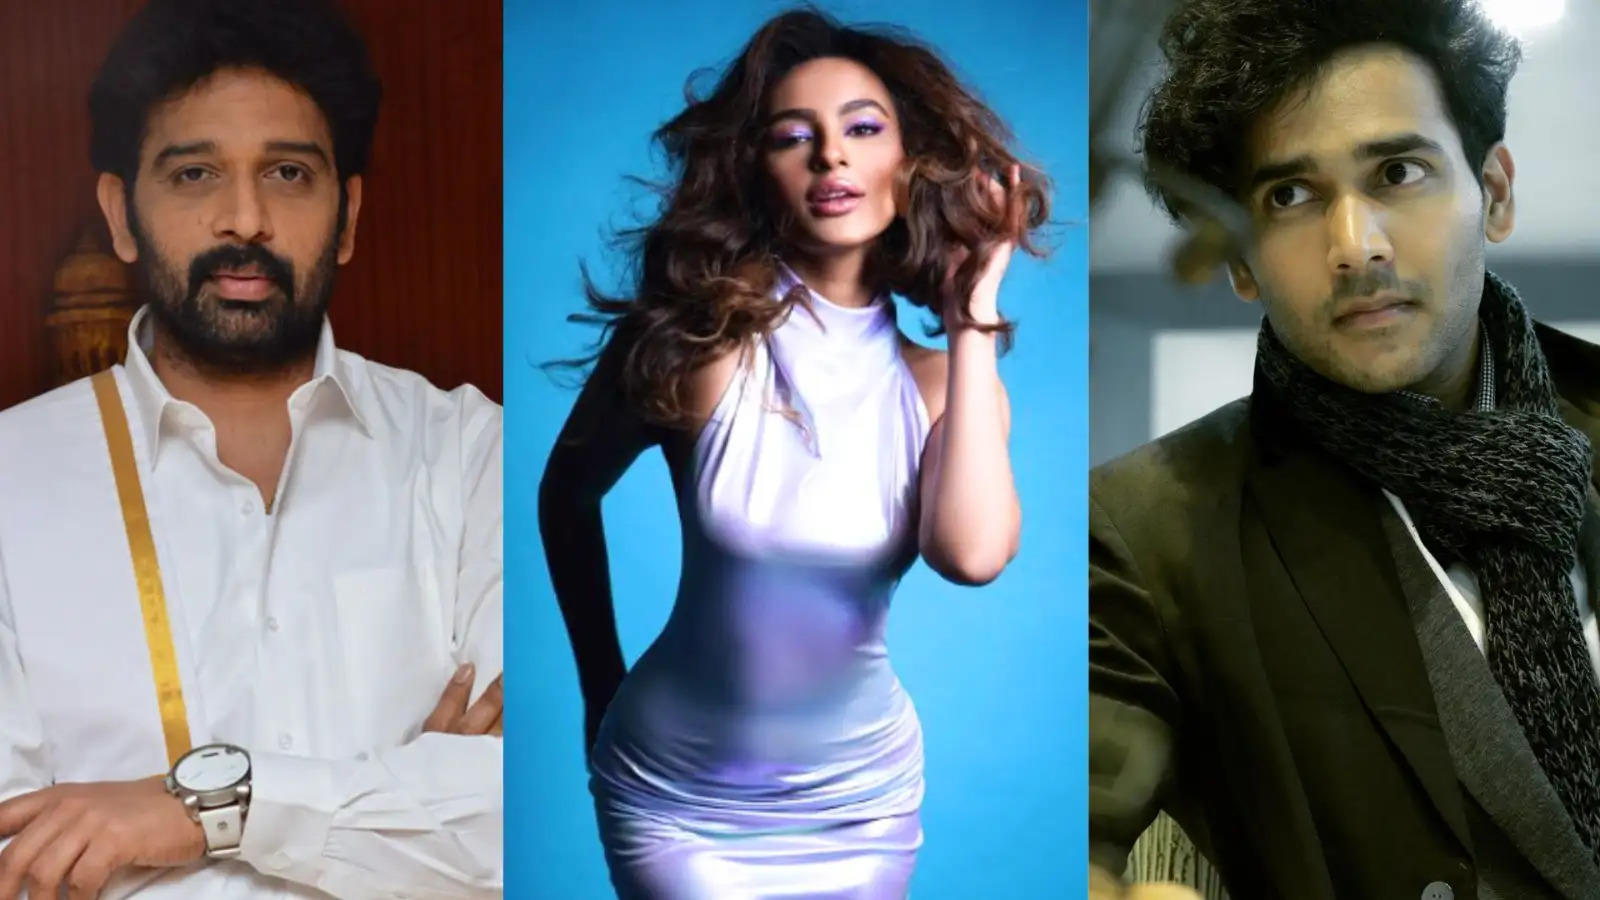 Actress Seerat Kapoor Roped In For Director Shravan's Next Phycological Thriller As Lead Alongside Naresh Agastya and J. D. Chakravarthy- Confirms Source